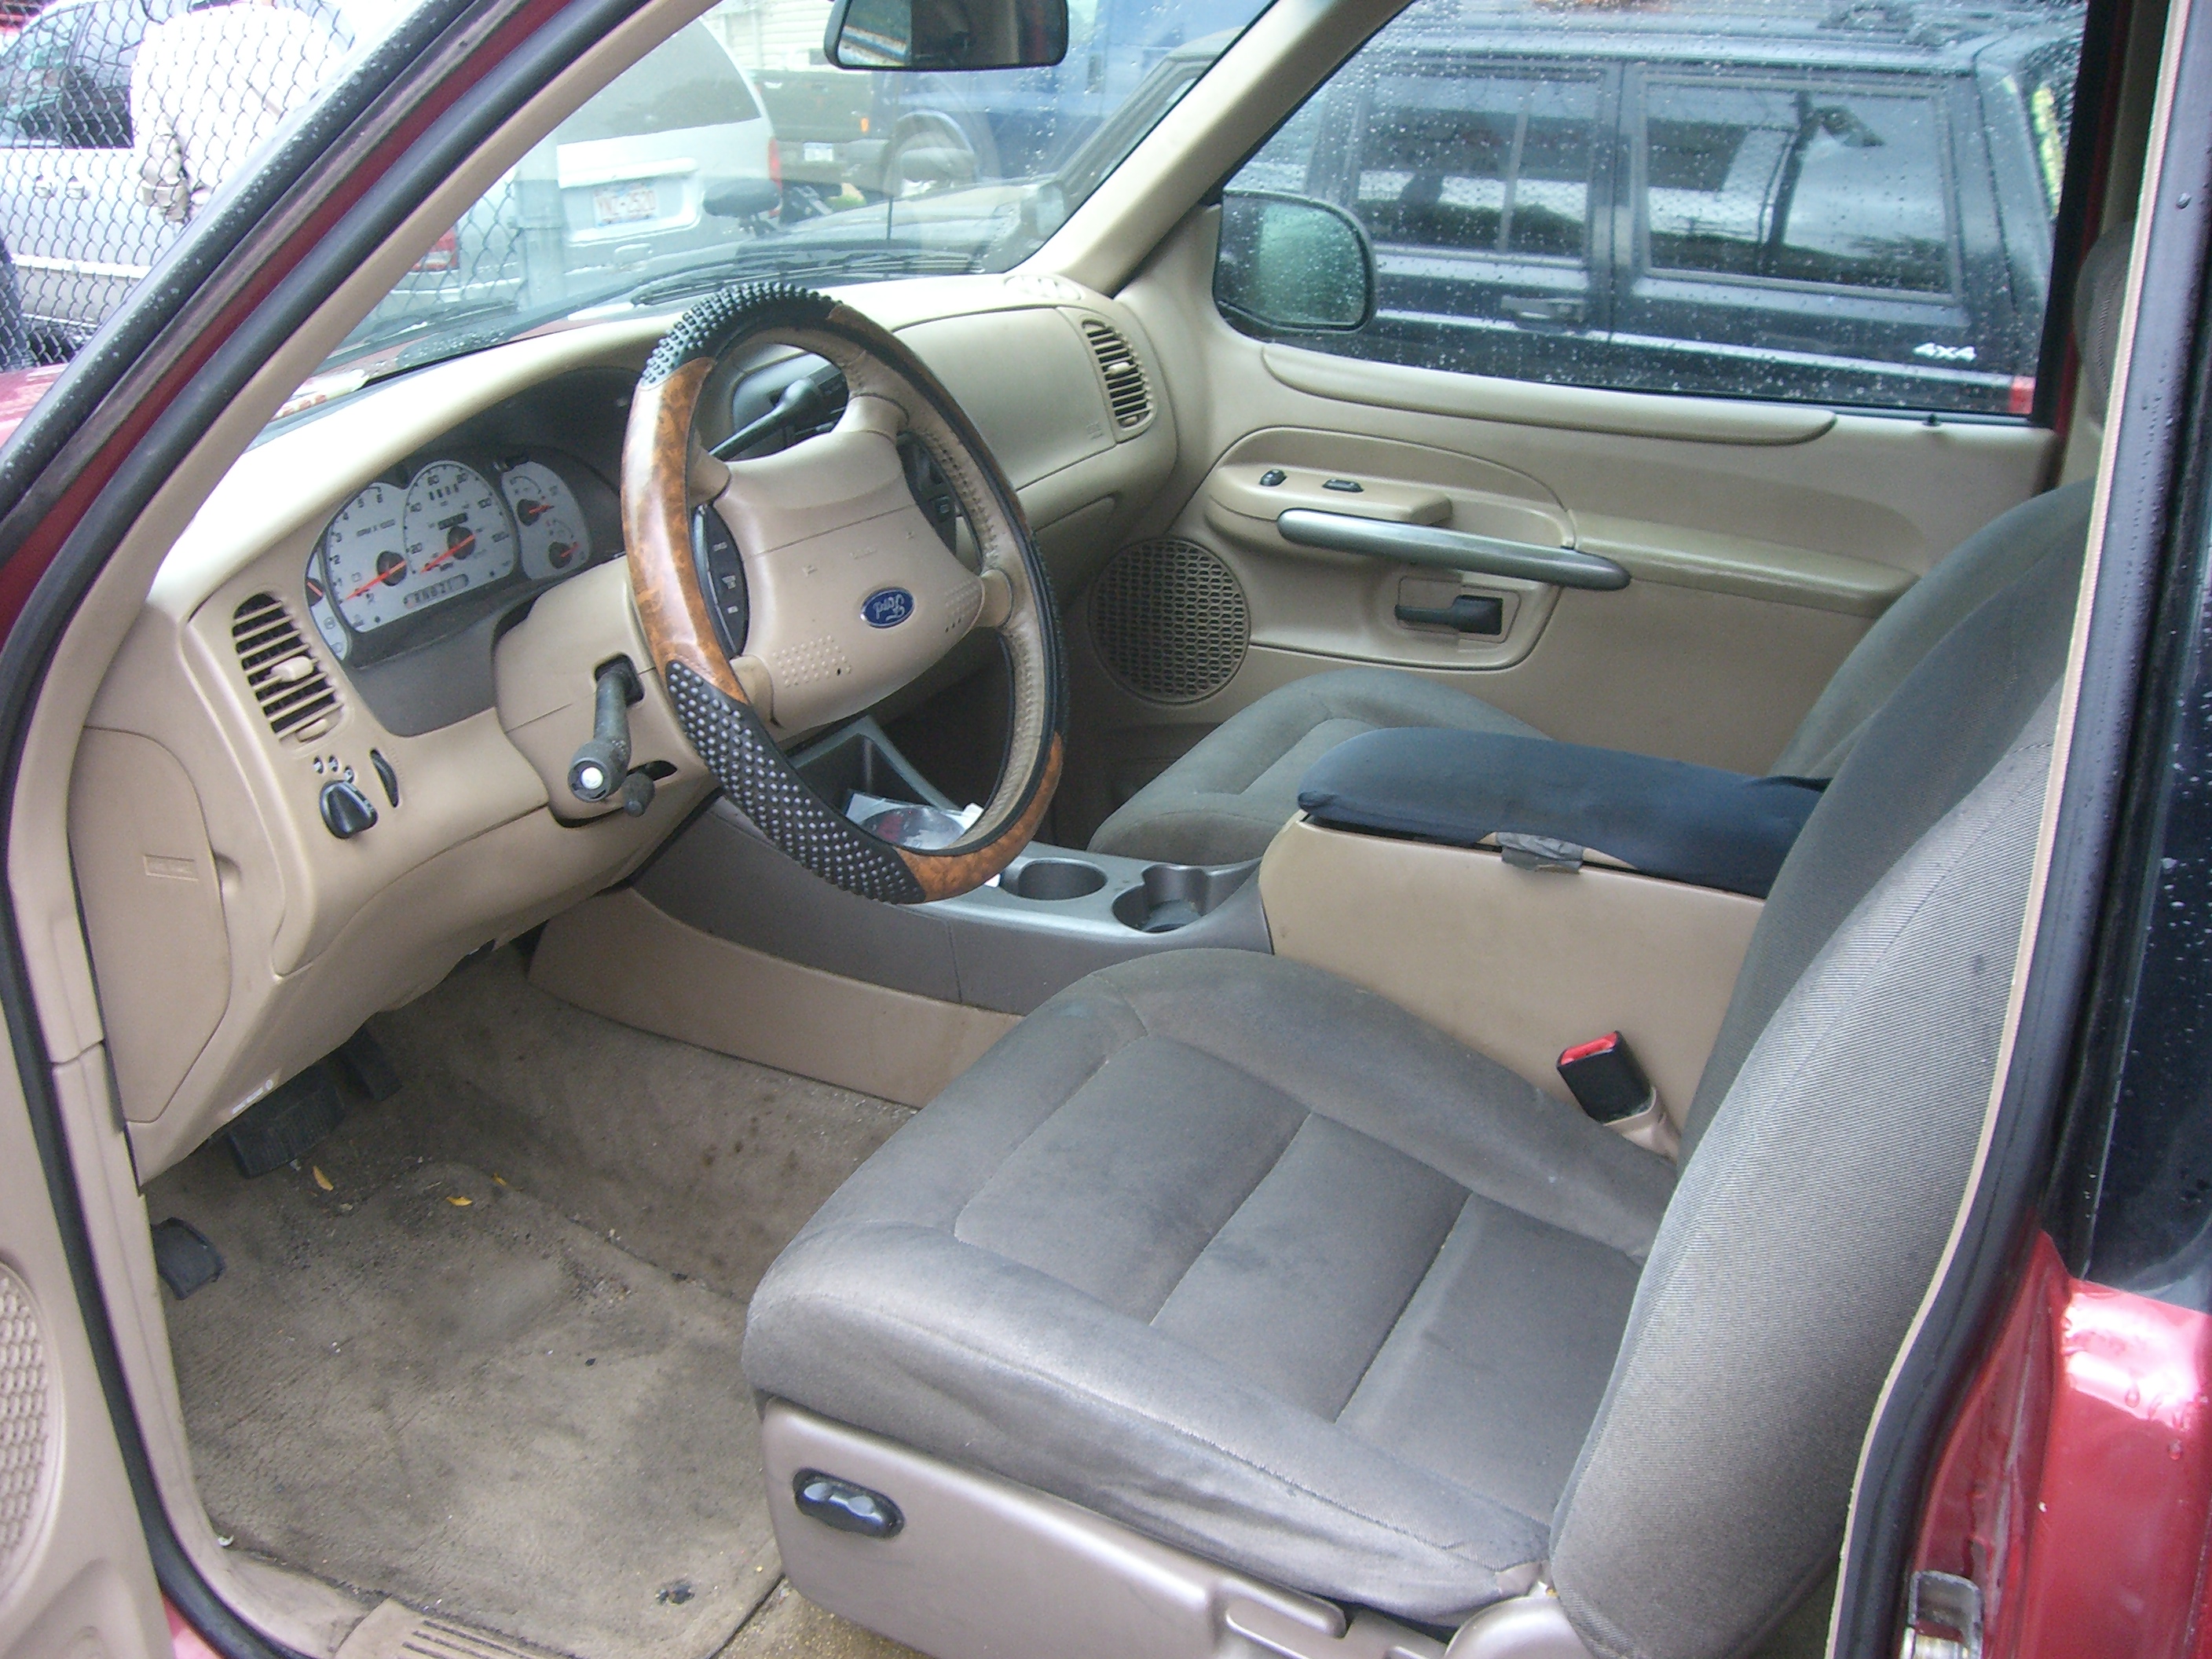 2001 Ford Explorer Sport Utility for sale in Brooklyn, NY